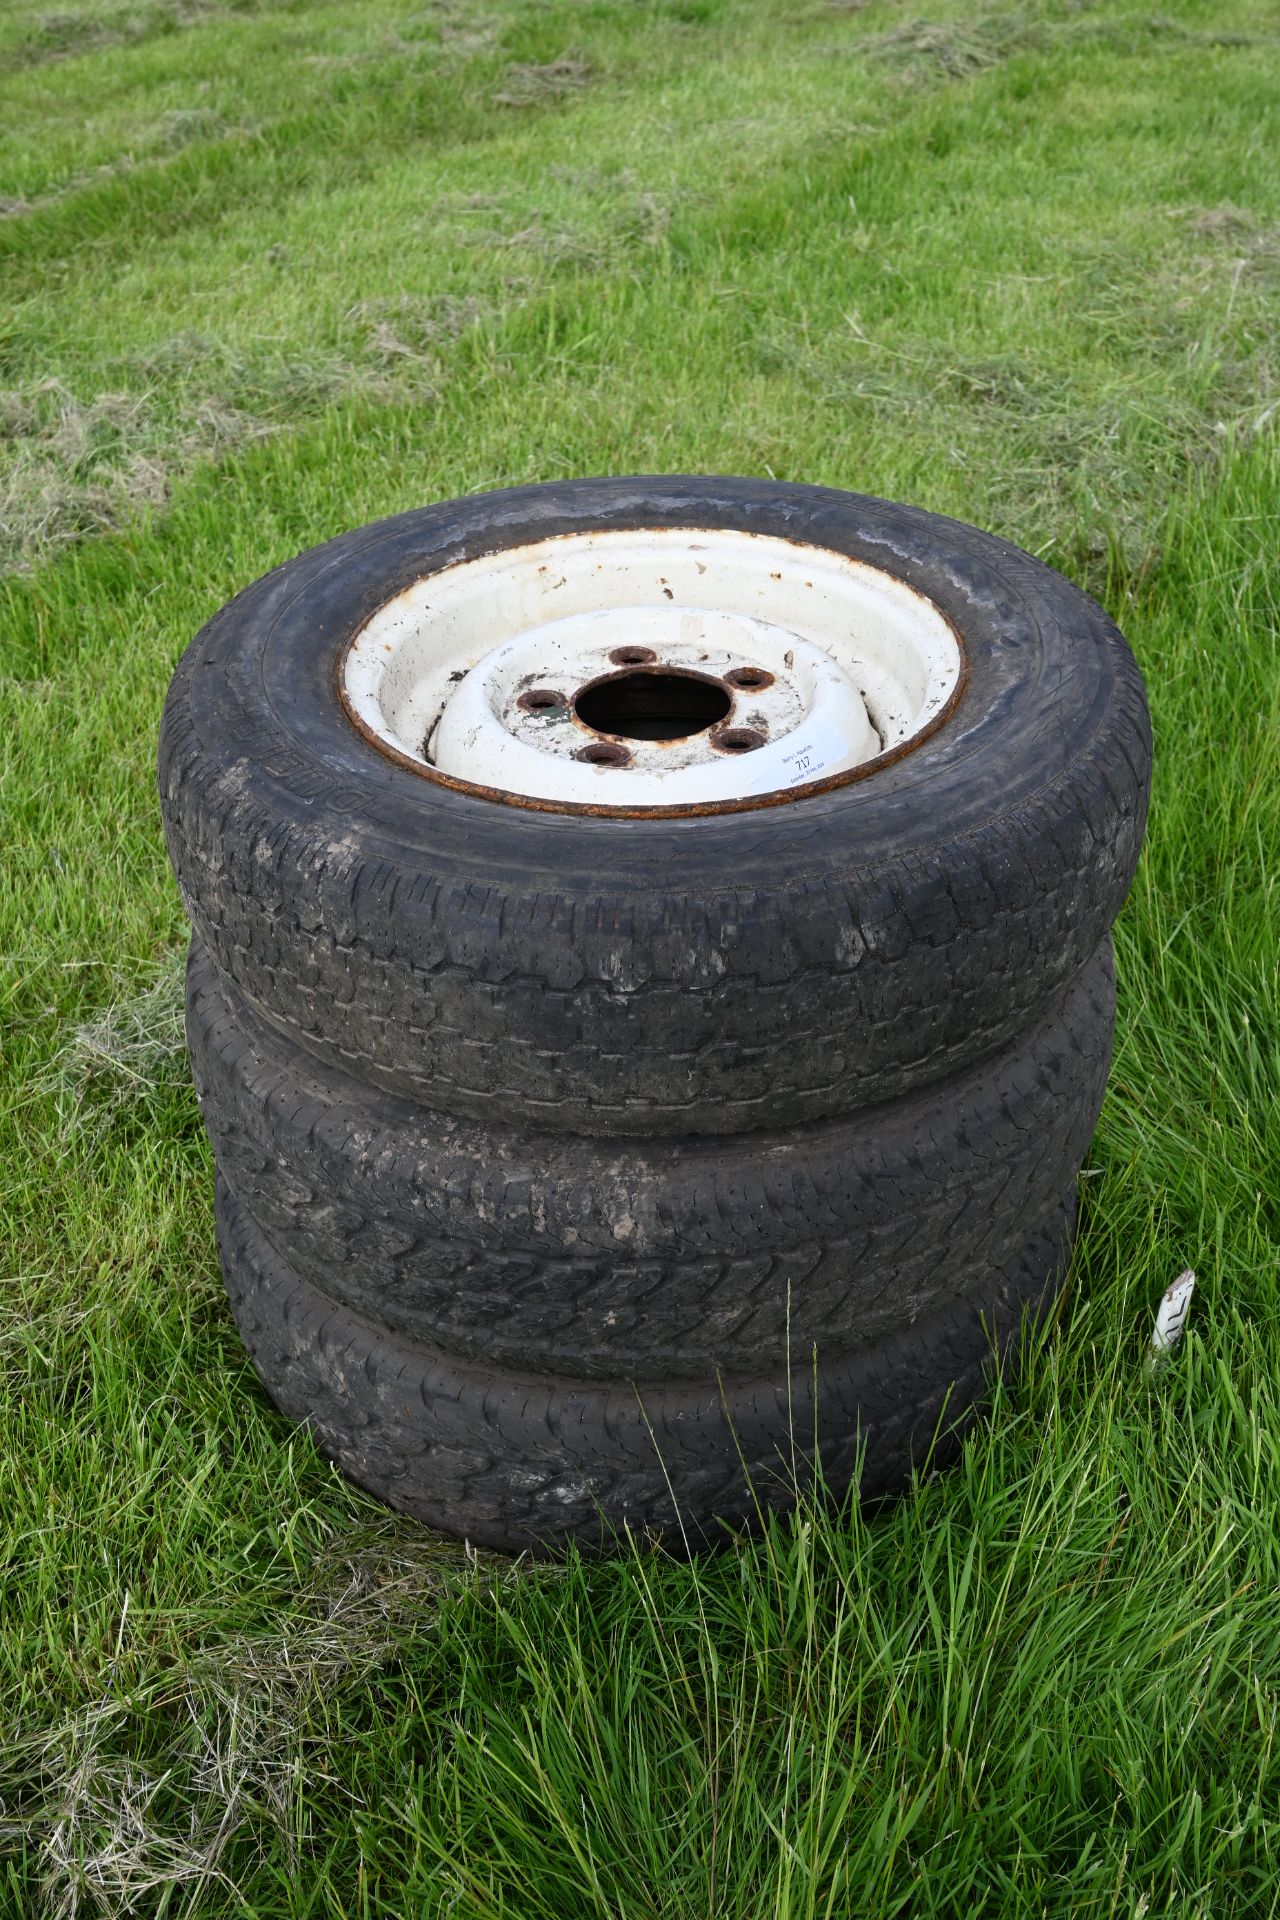 3x Landrover wheels with tyres